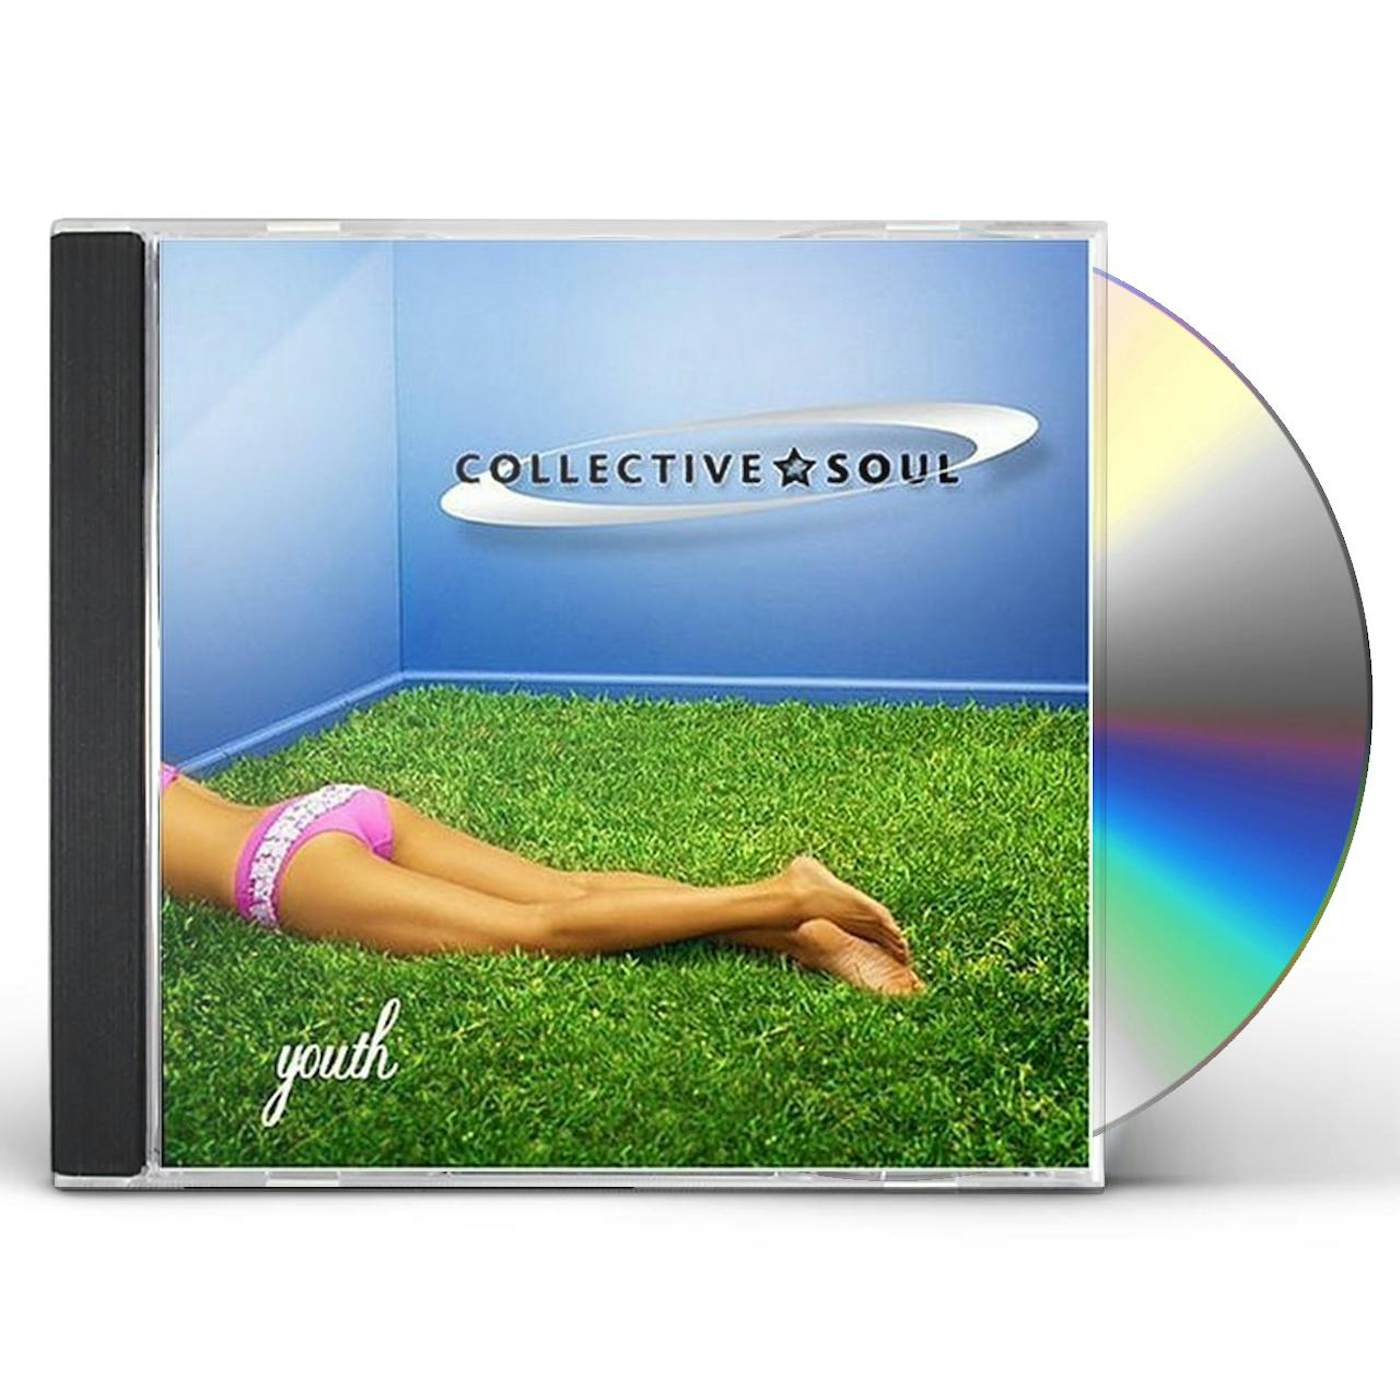 Collective Soul YOUTH CD